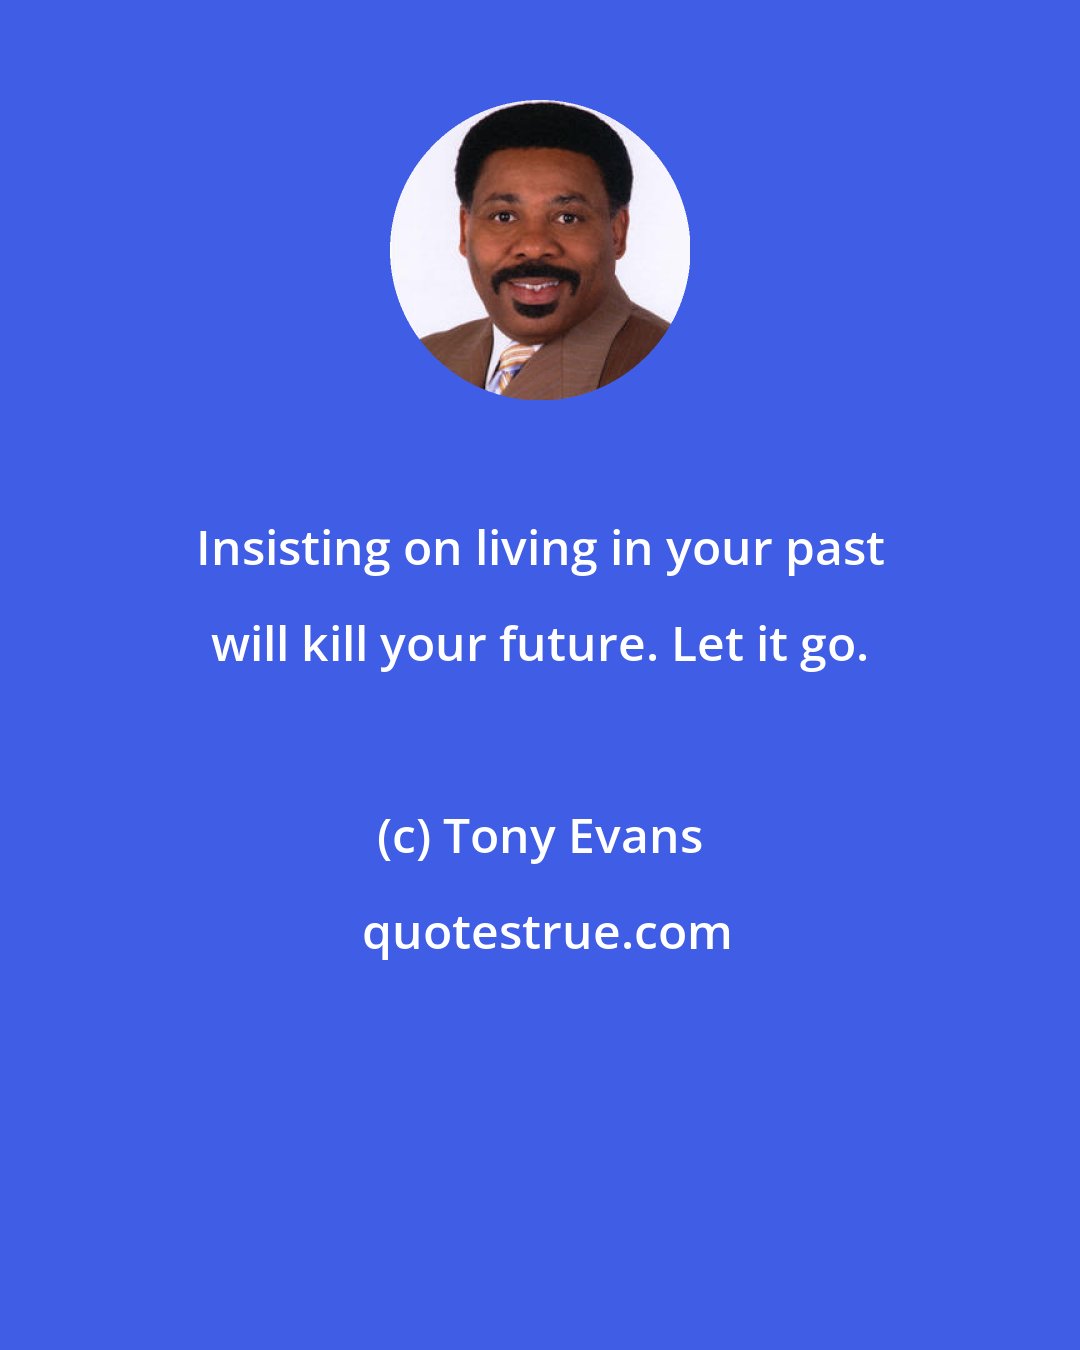 Tony Evans: Insisting on living in your past will kill your future. Let it go.